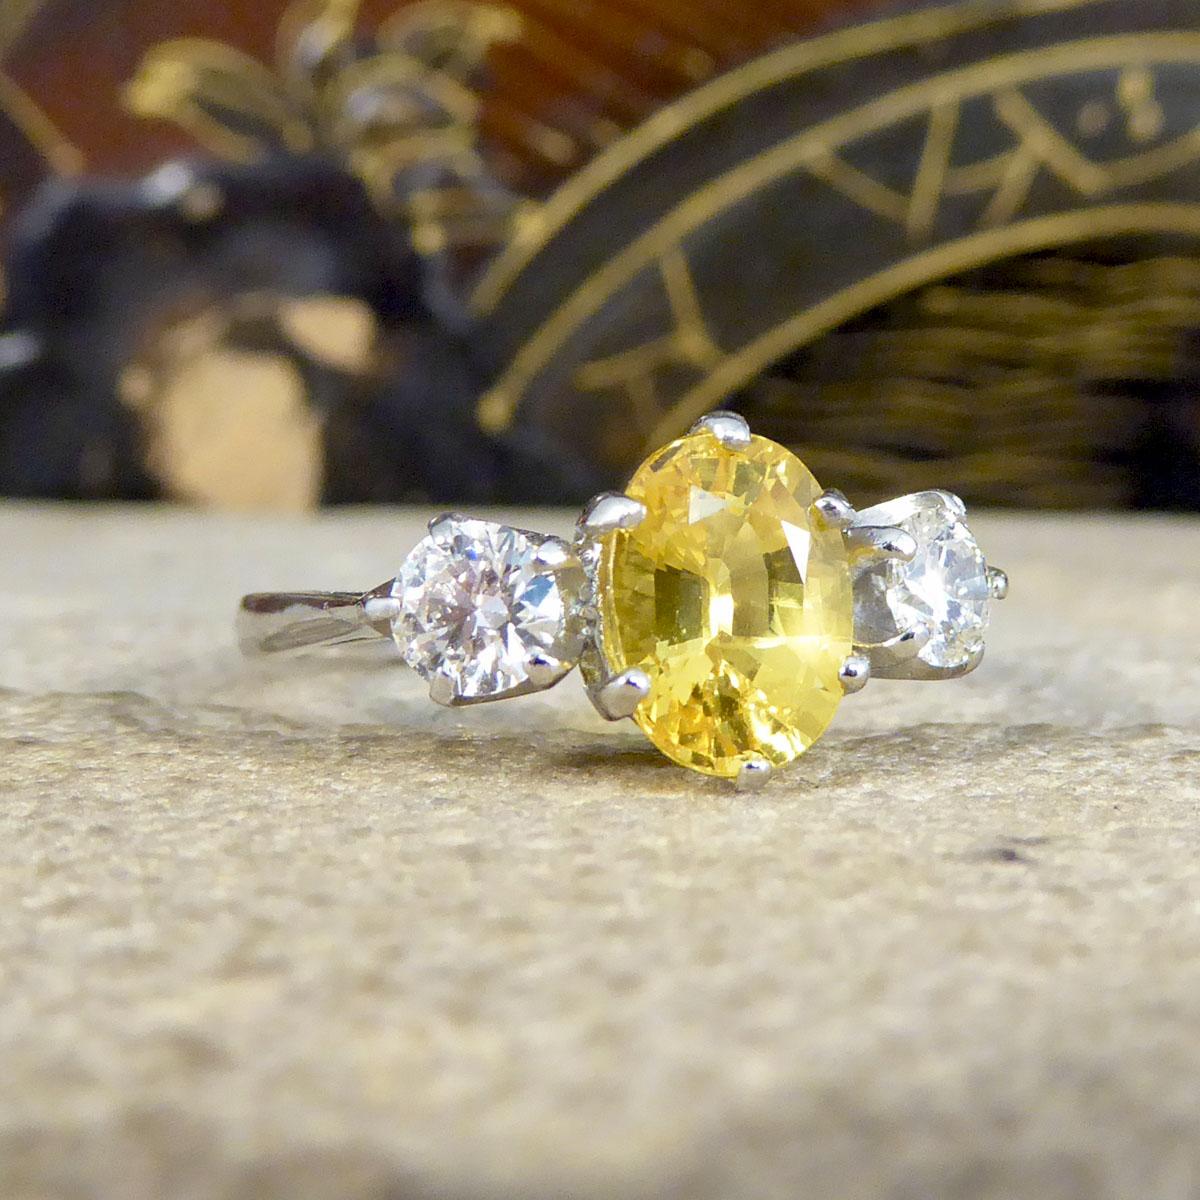 An absolutely gorgeous and sparkly Yellow Sapphire and Diamond three stone ring holds three beautiful stones set in a secure Platinum claw setting. In the centre sits a lovely bright Oval Cut Yellow Sapphire in the centre weighing 1.84ct with a